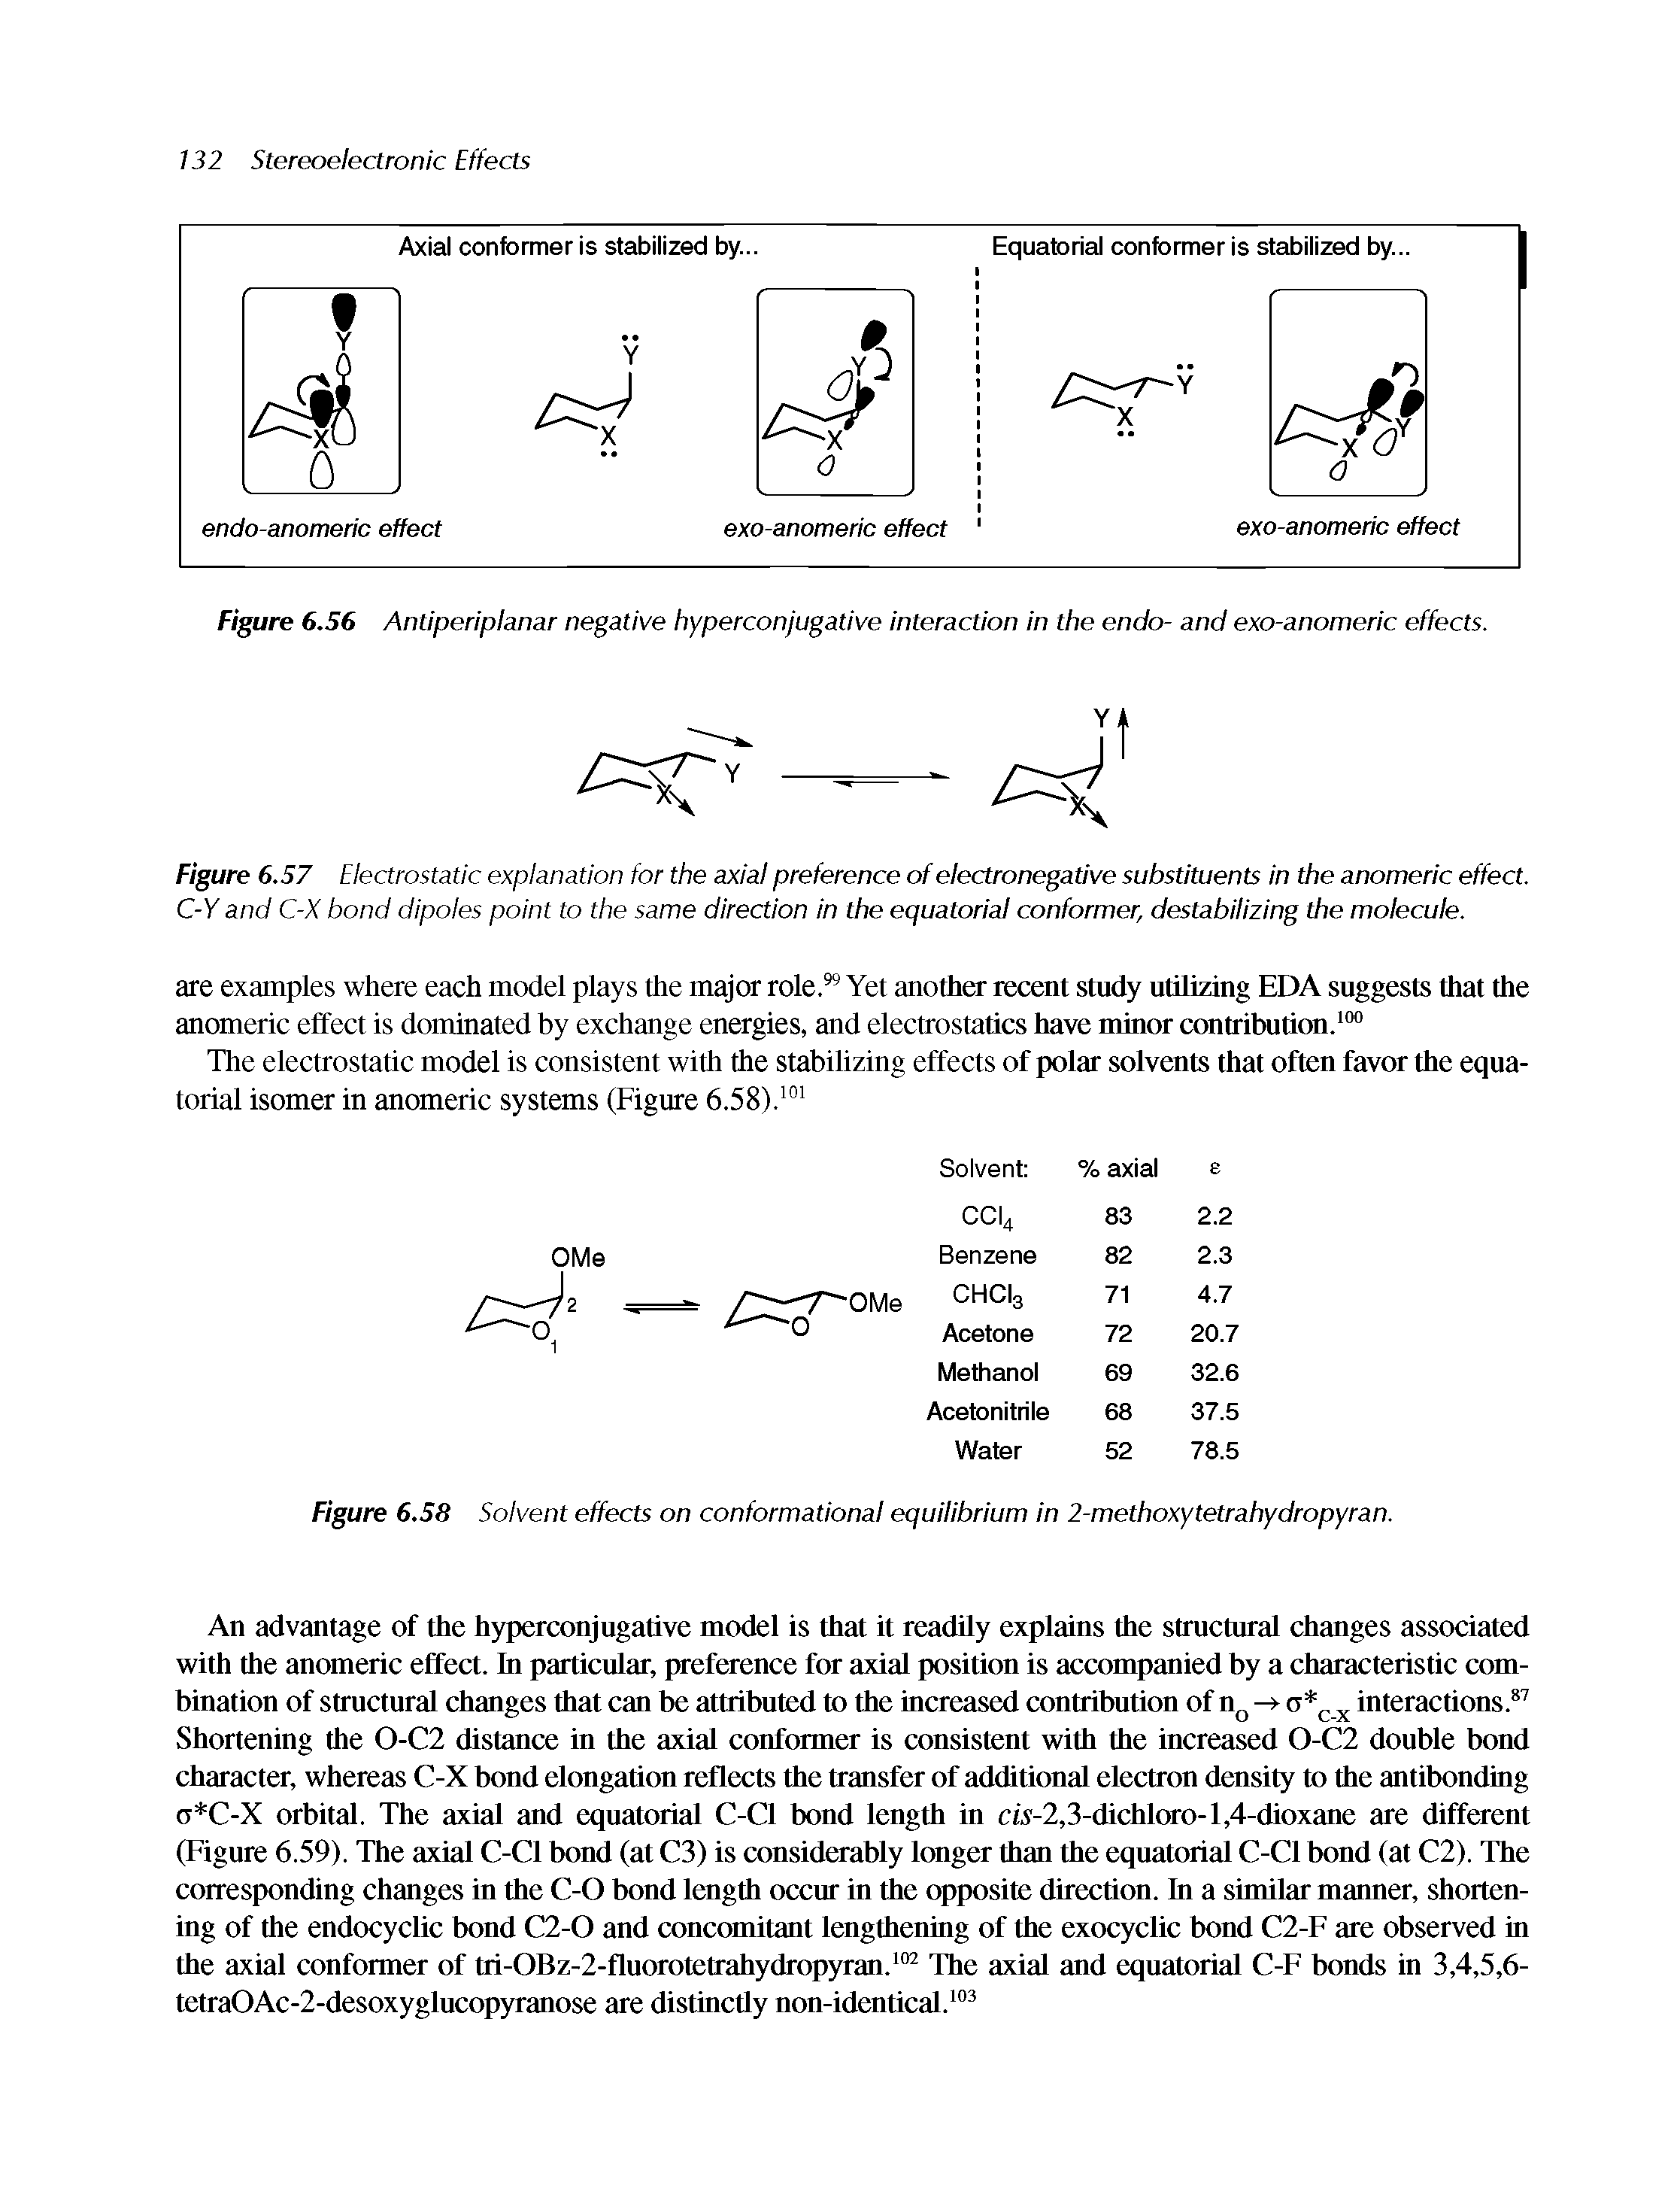 Figure 6,58 Solvent effects on conformational equilibrium in 2-methoxytetrahydropyran.